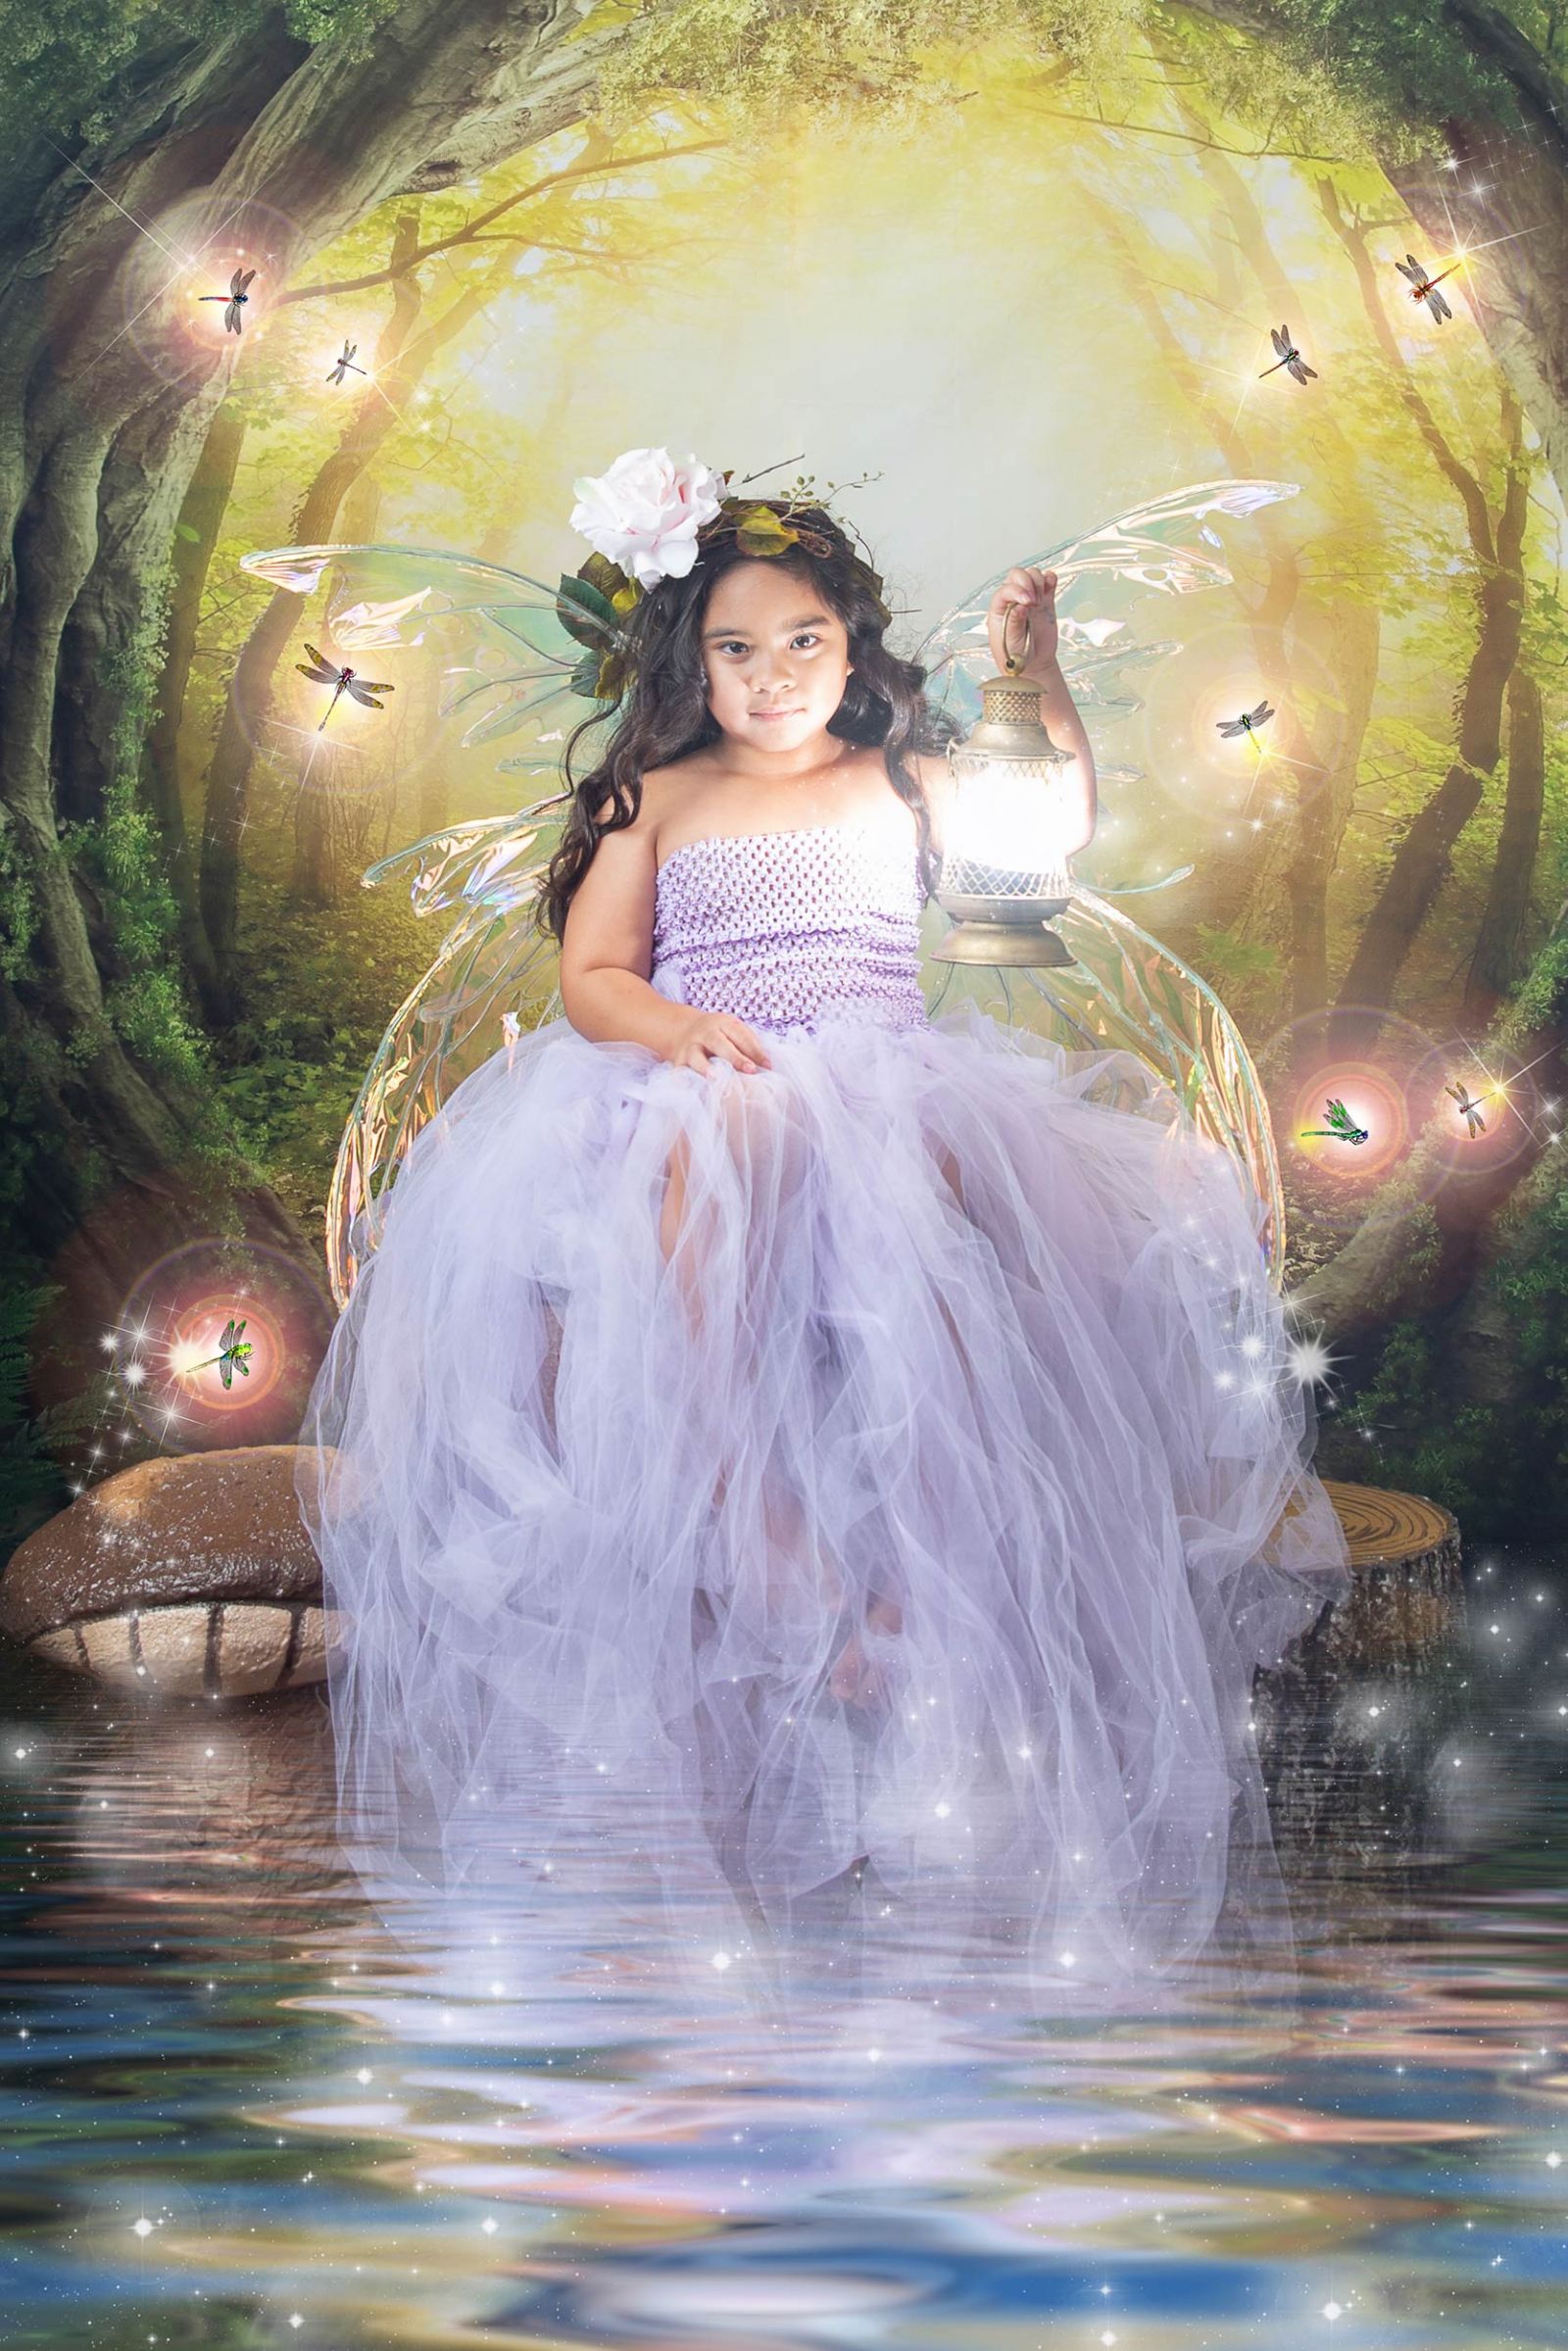 Plano Storybook Enchanted Fairies Photographer White Lavender Photography